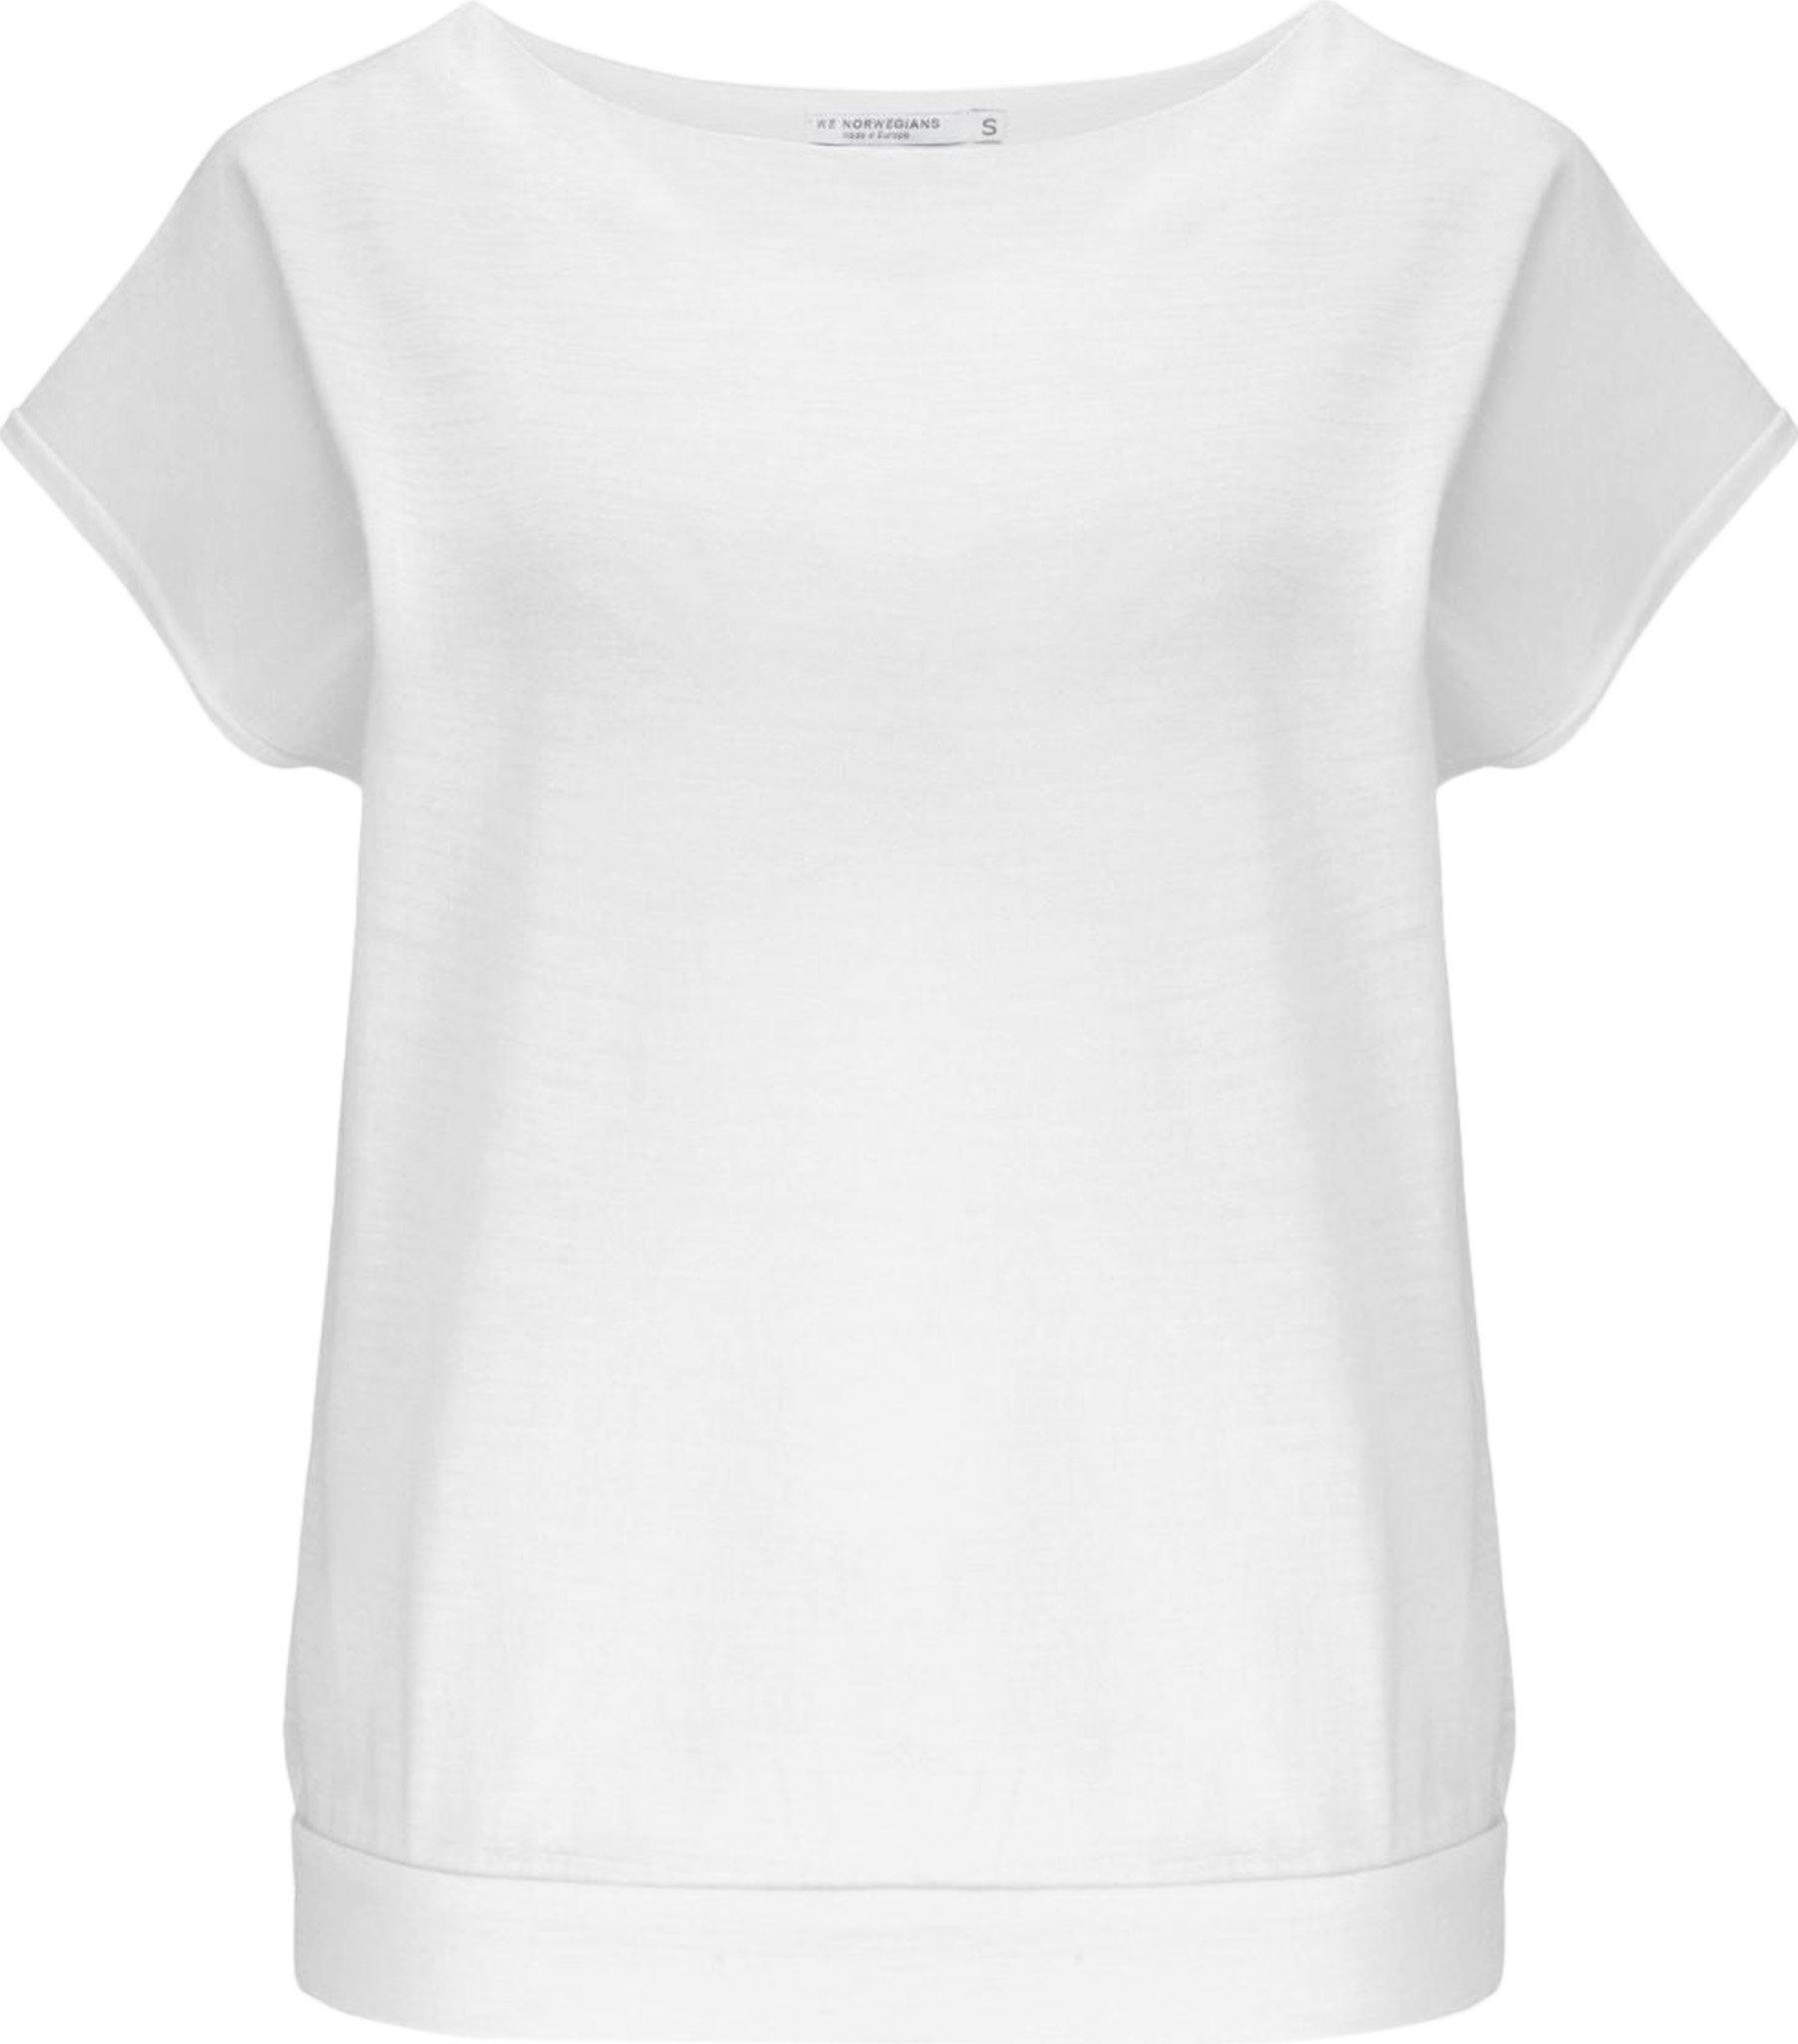 Product image for Skog Top - Women's